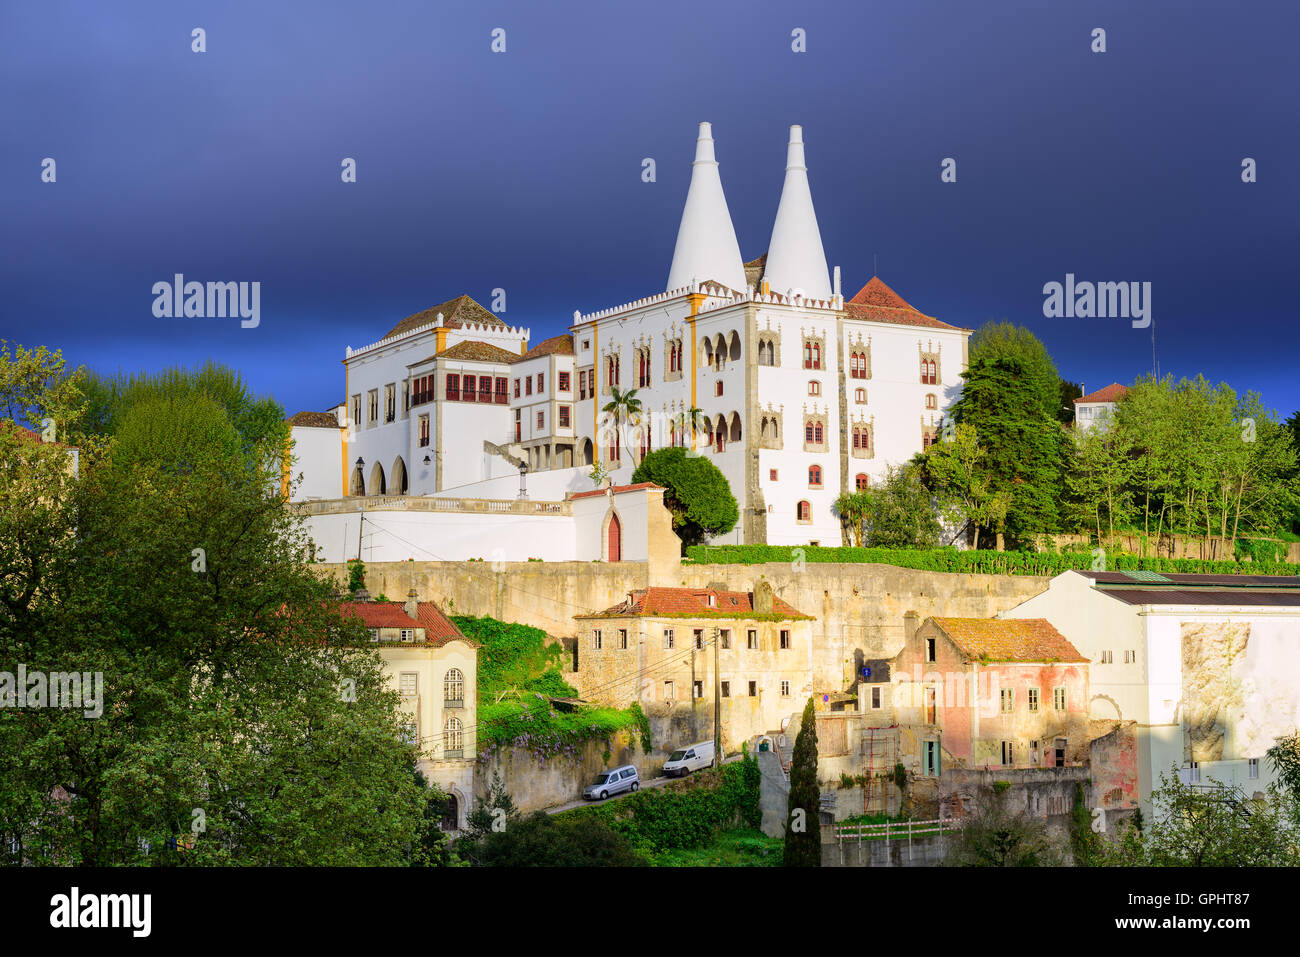 The National Palace, Sintra, Portugal Stock Photo